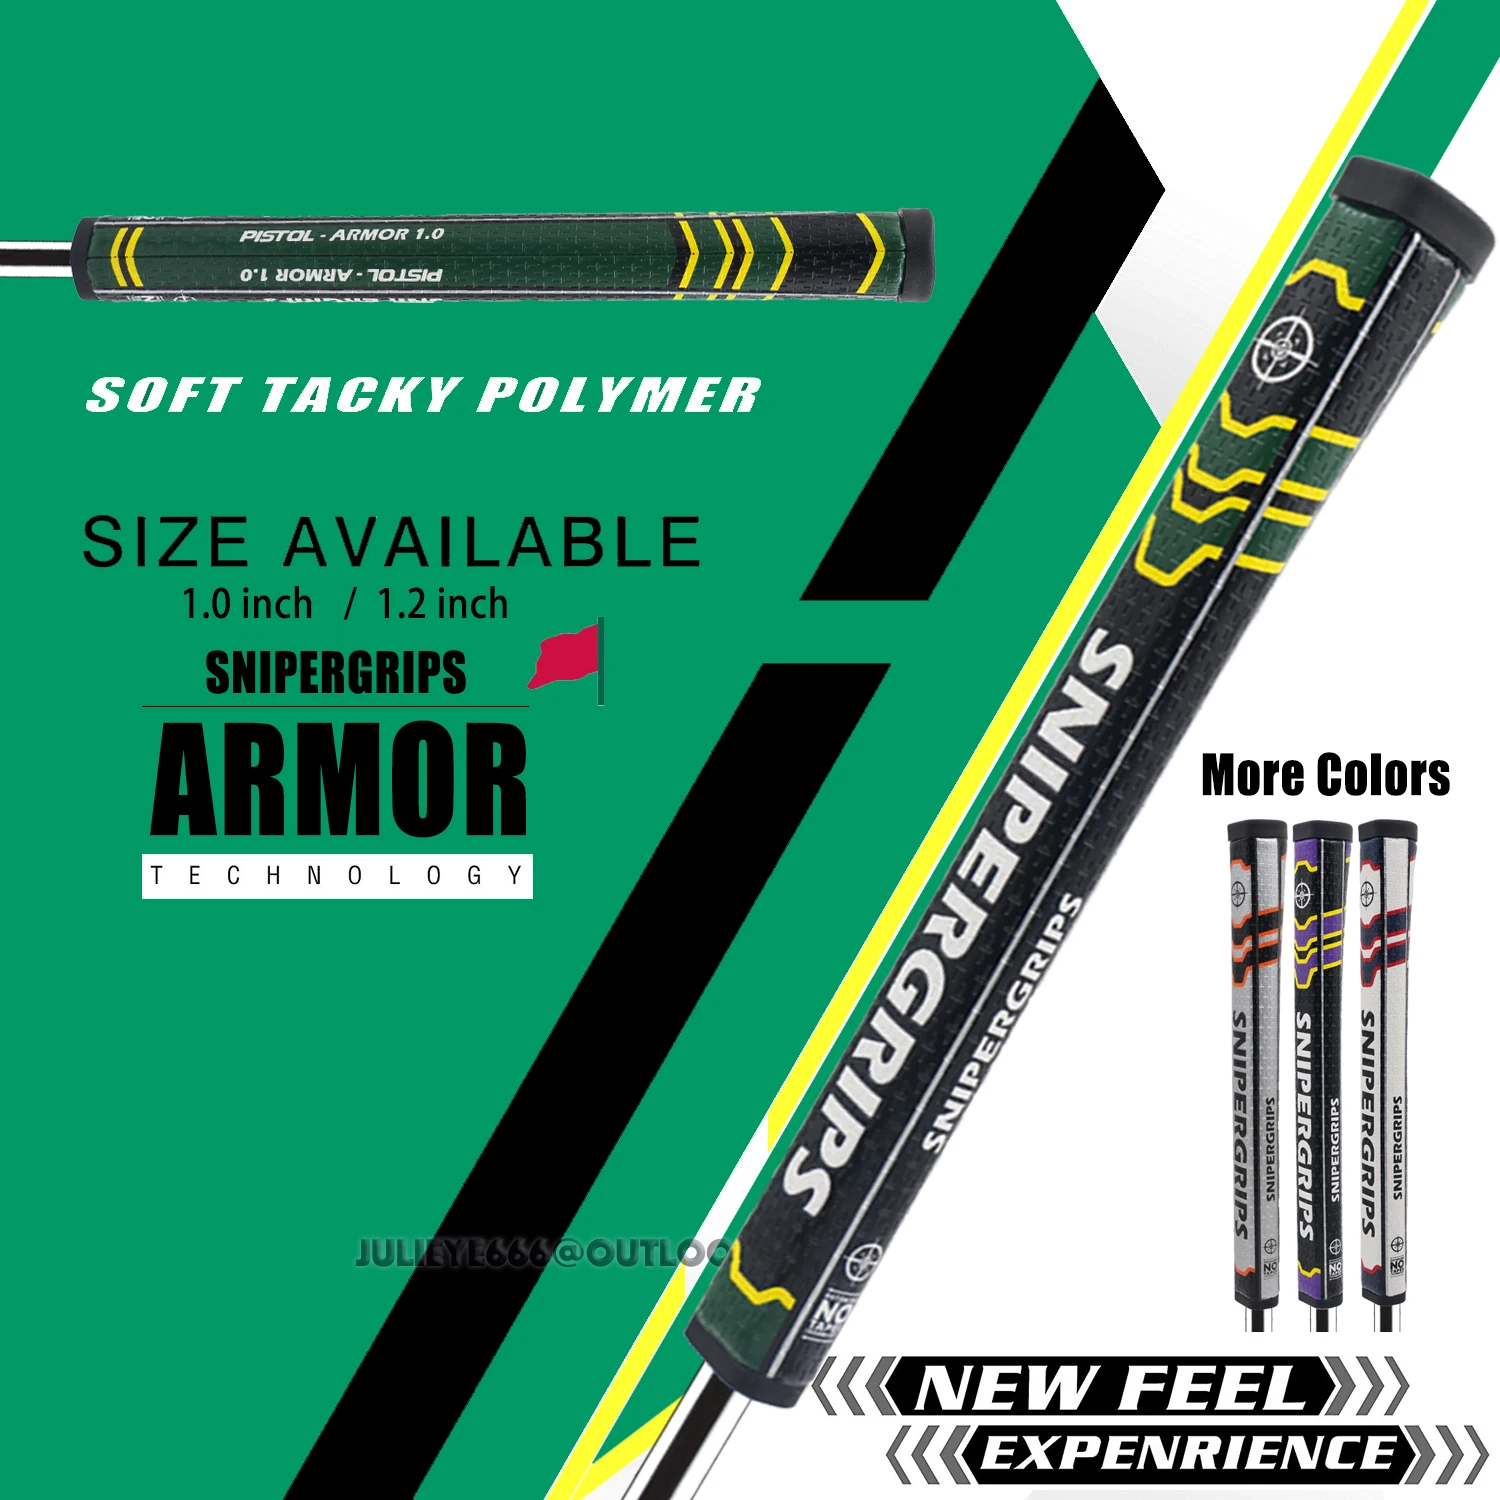 

SNIPER Golf Club Putter Grips Pistol Armor Style Size 1.0/1.2 Golf Club PU Grip For Putter 4 Colors